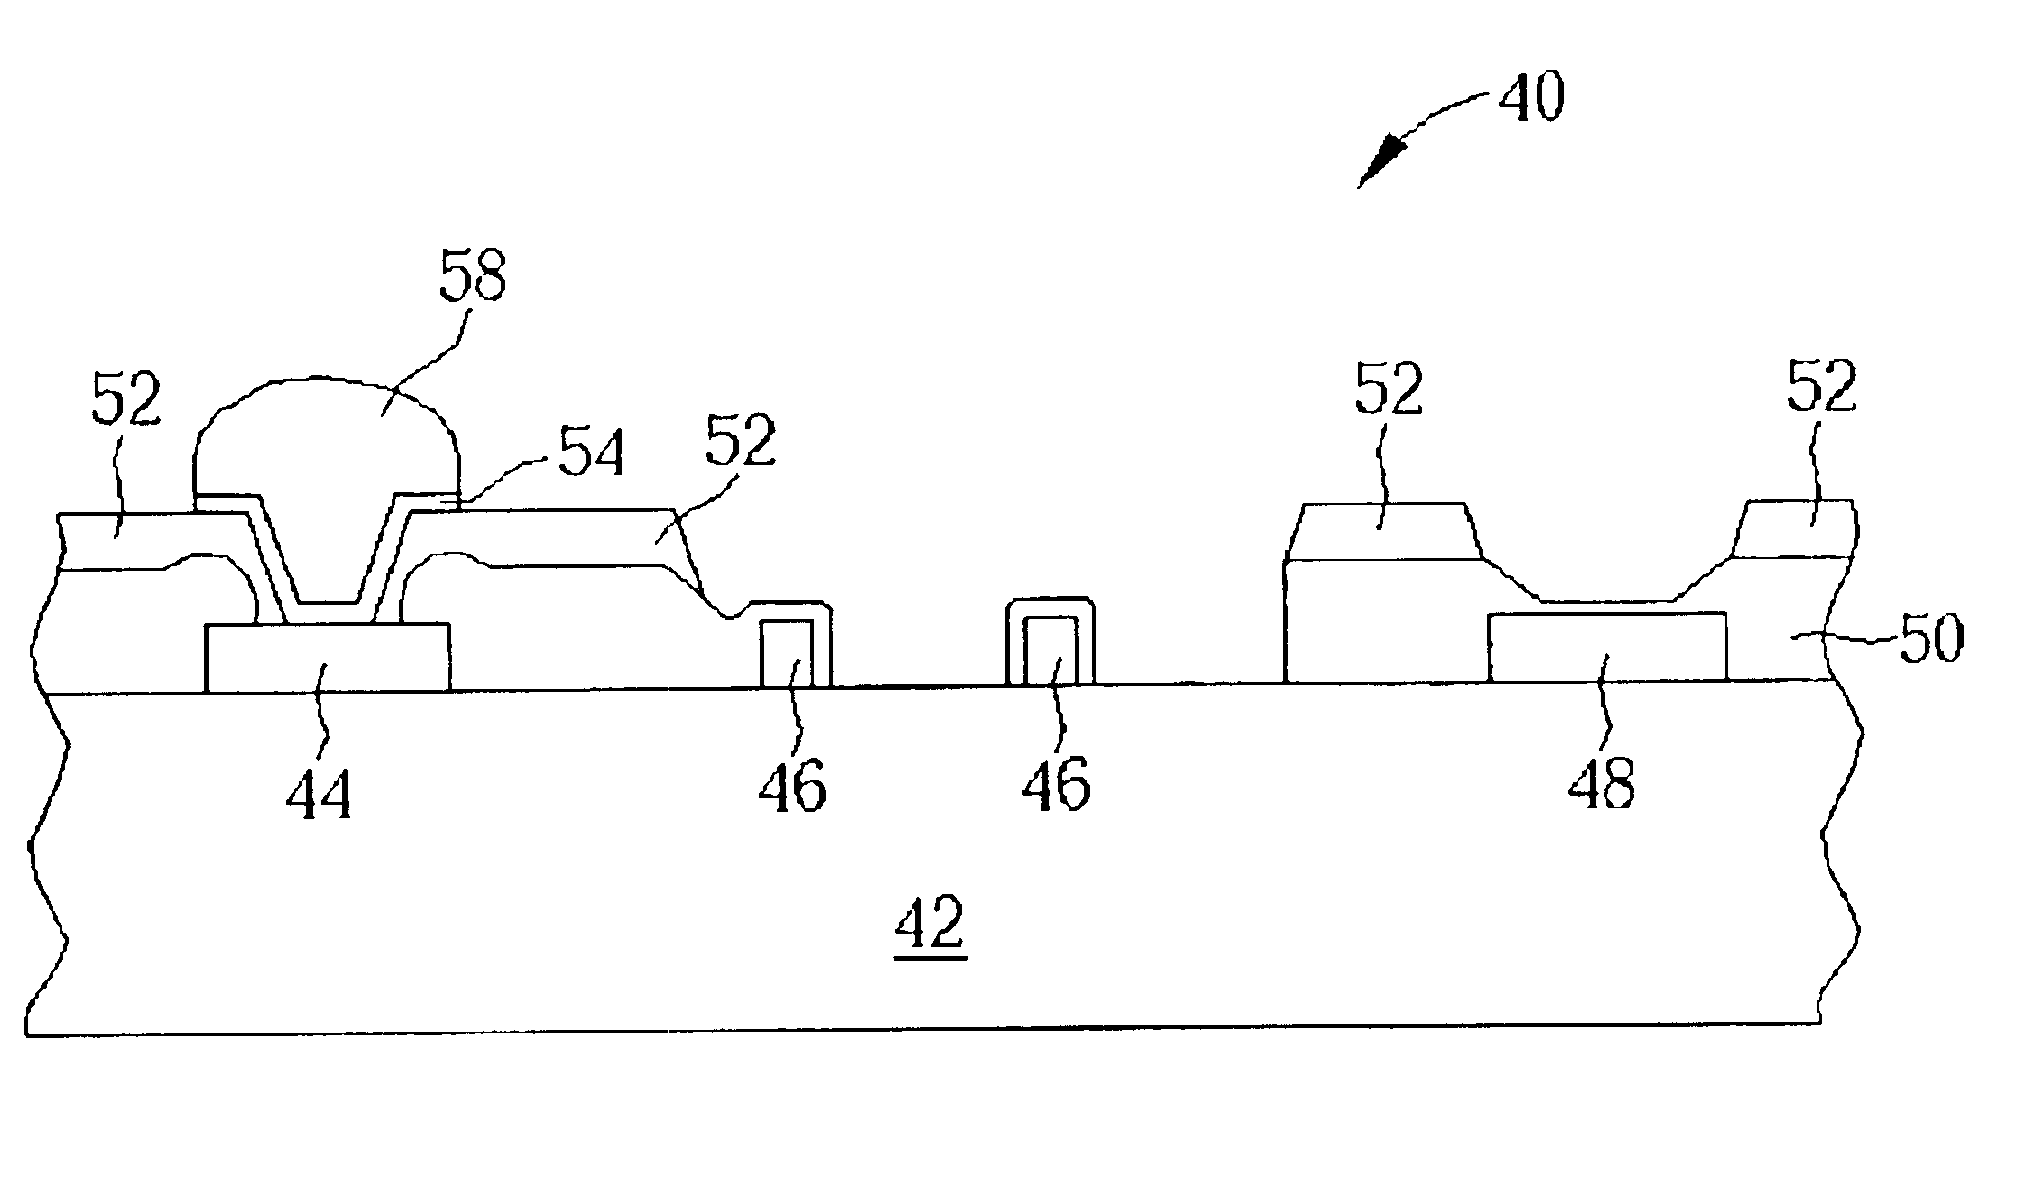 Solder bump structure and laser repair process for memory device